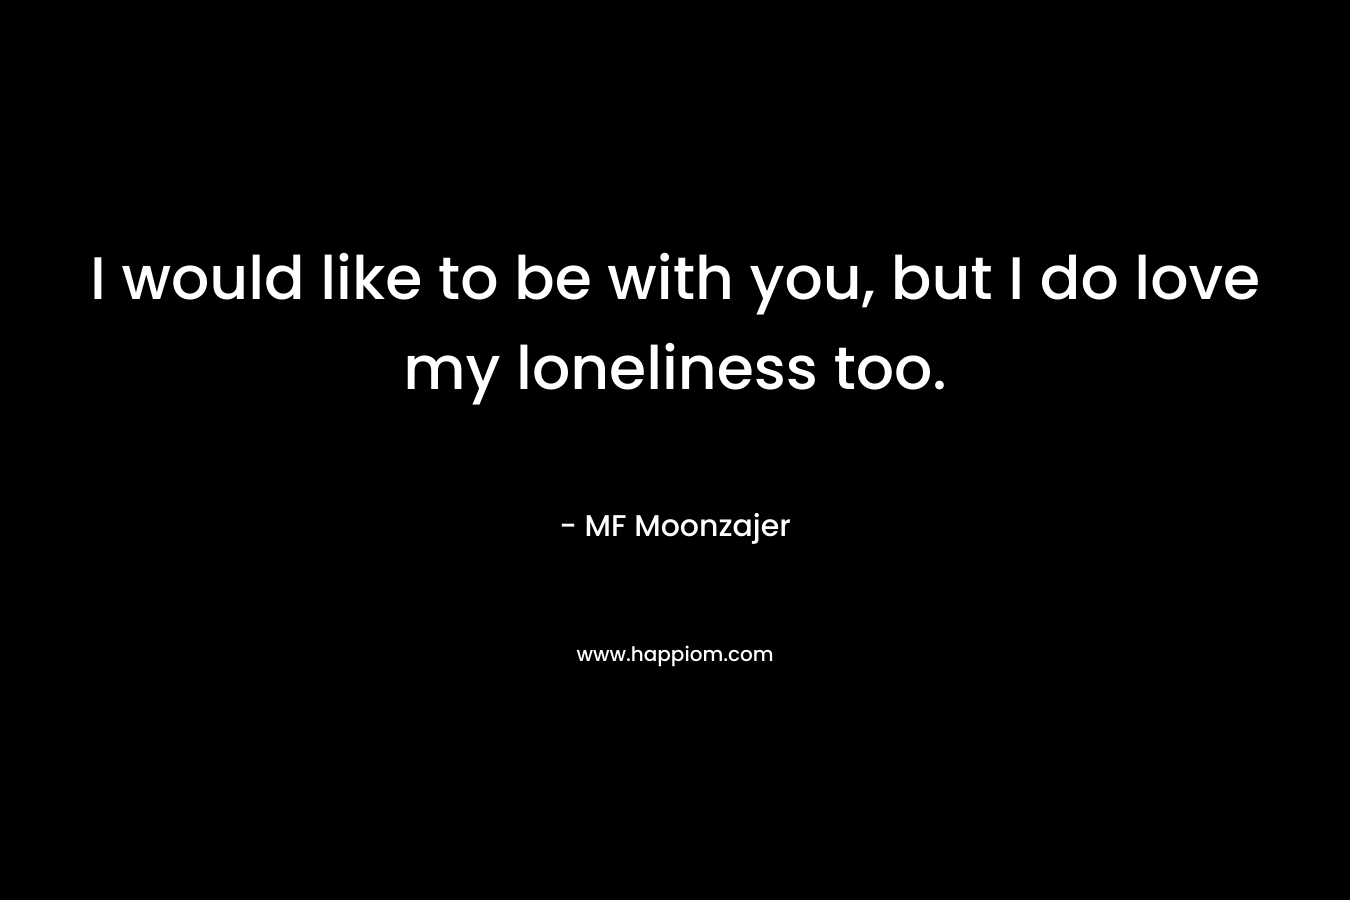 I would like to be with you, but I do love my loneliness too.